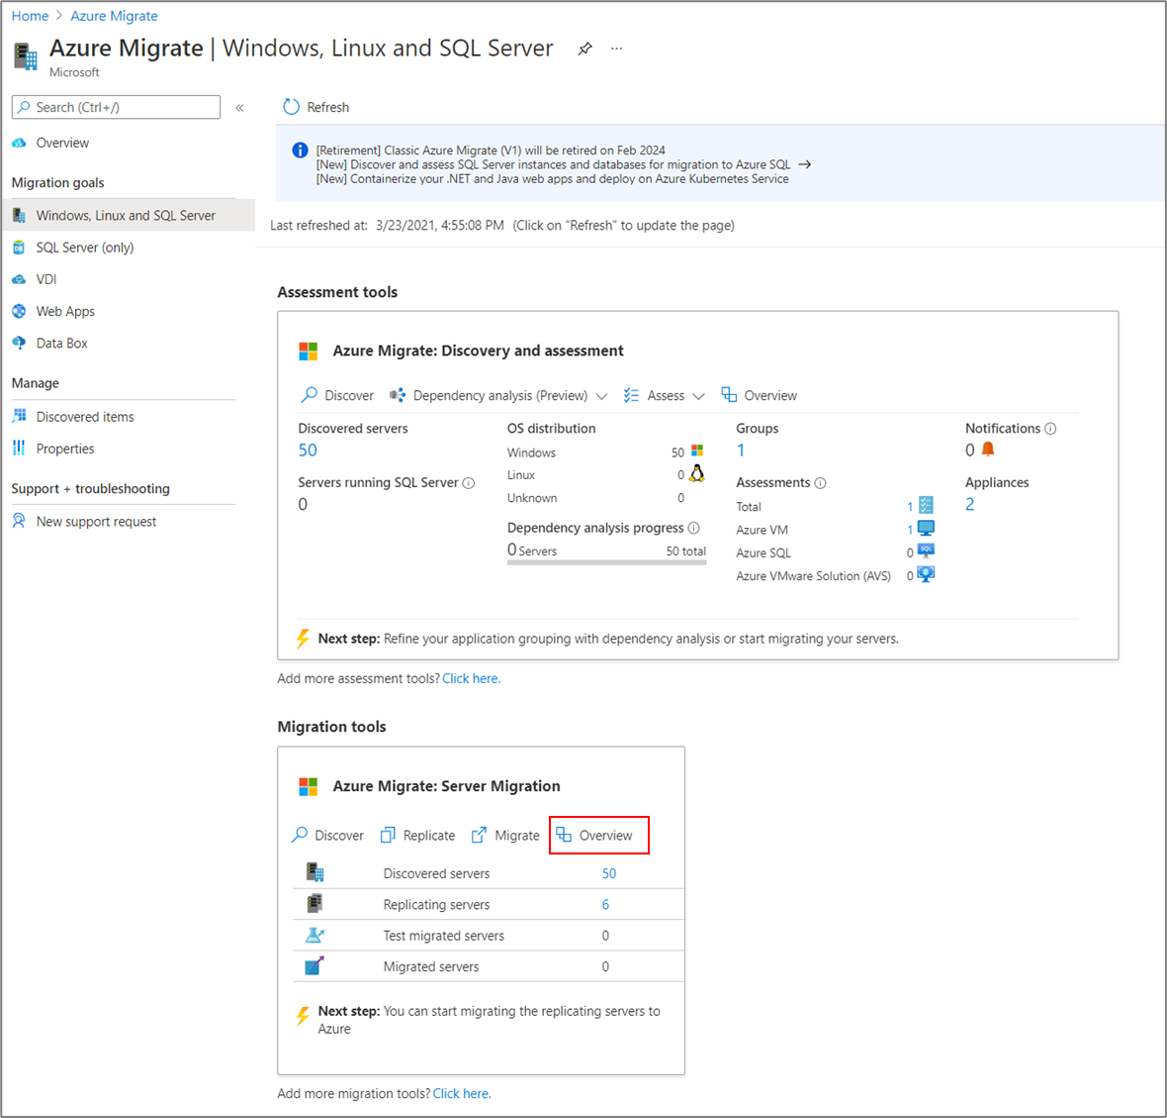 Screenshot that shows the Overview page on the Azure Migrate hub.